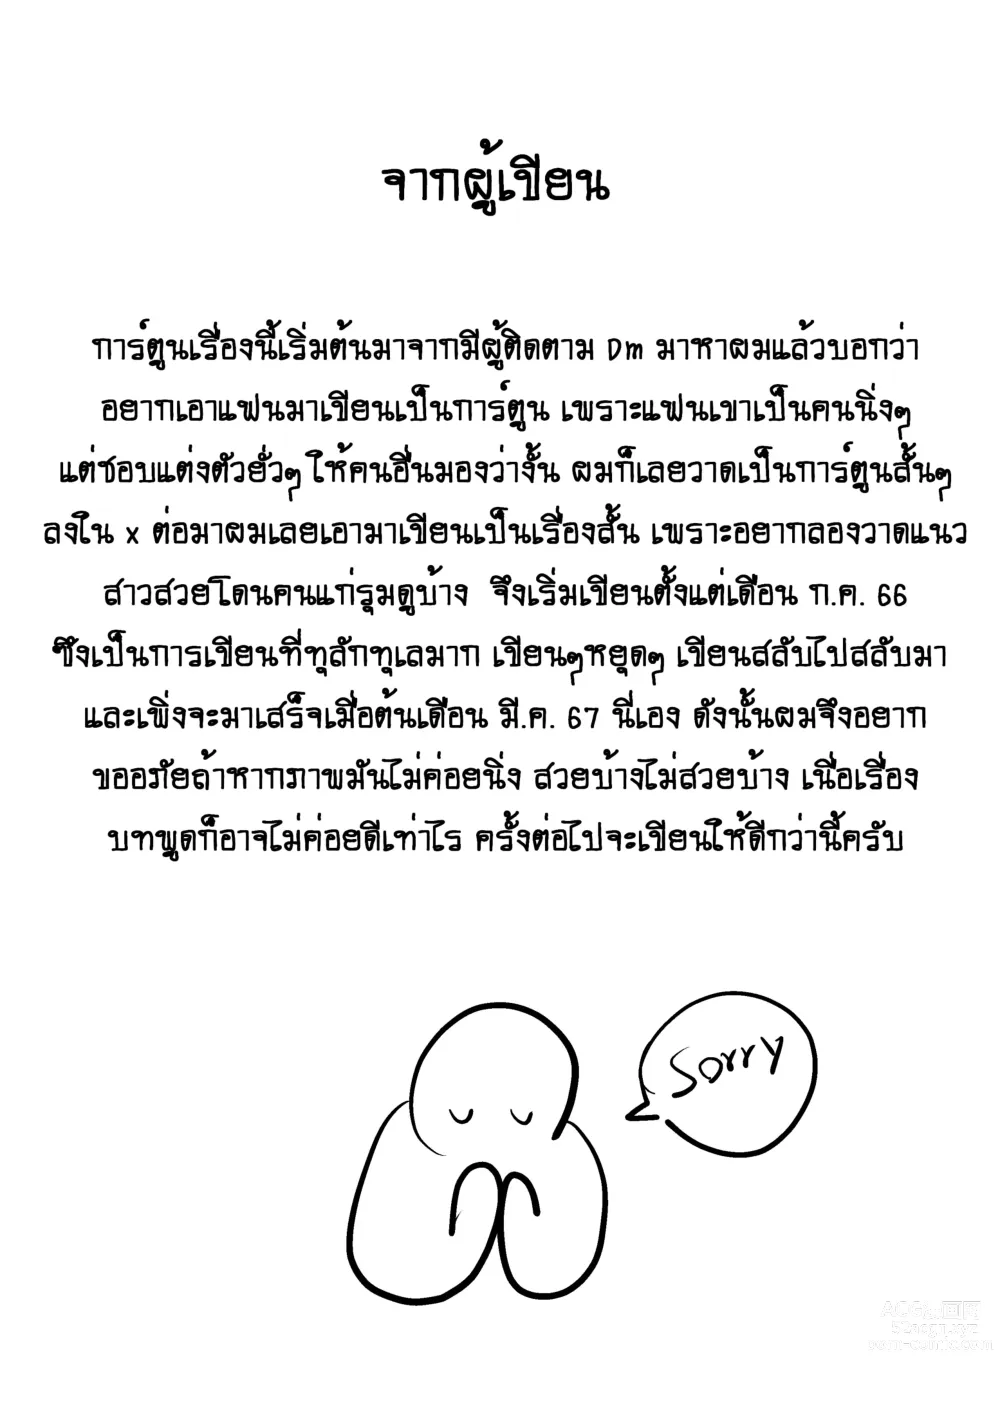 Page 2 of doujinshi My girlfriend is secretly lewd. แฟนผมแอบร่าน